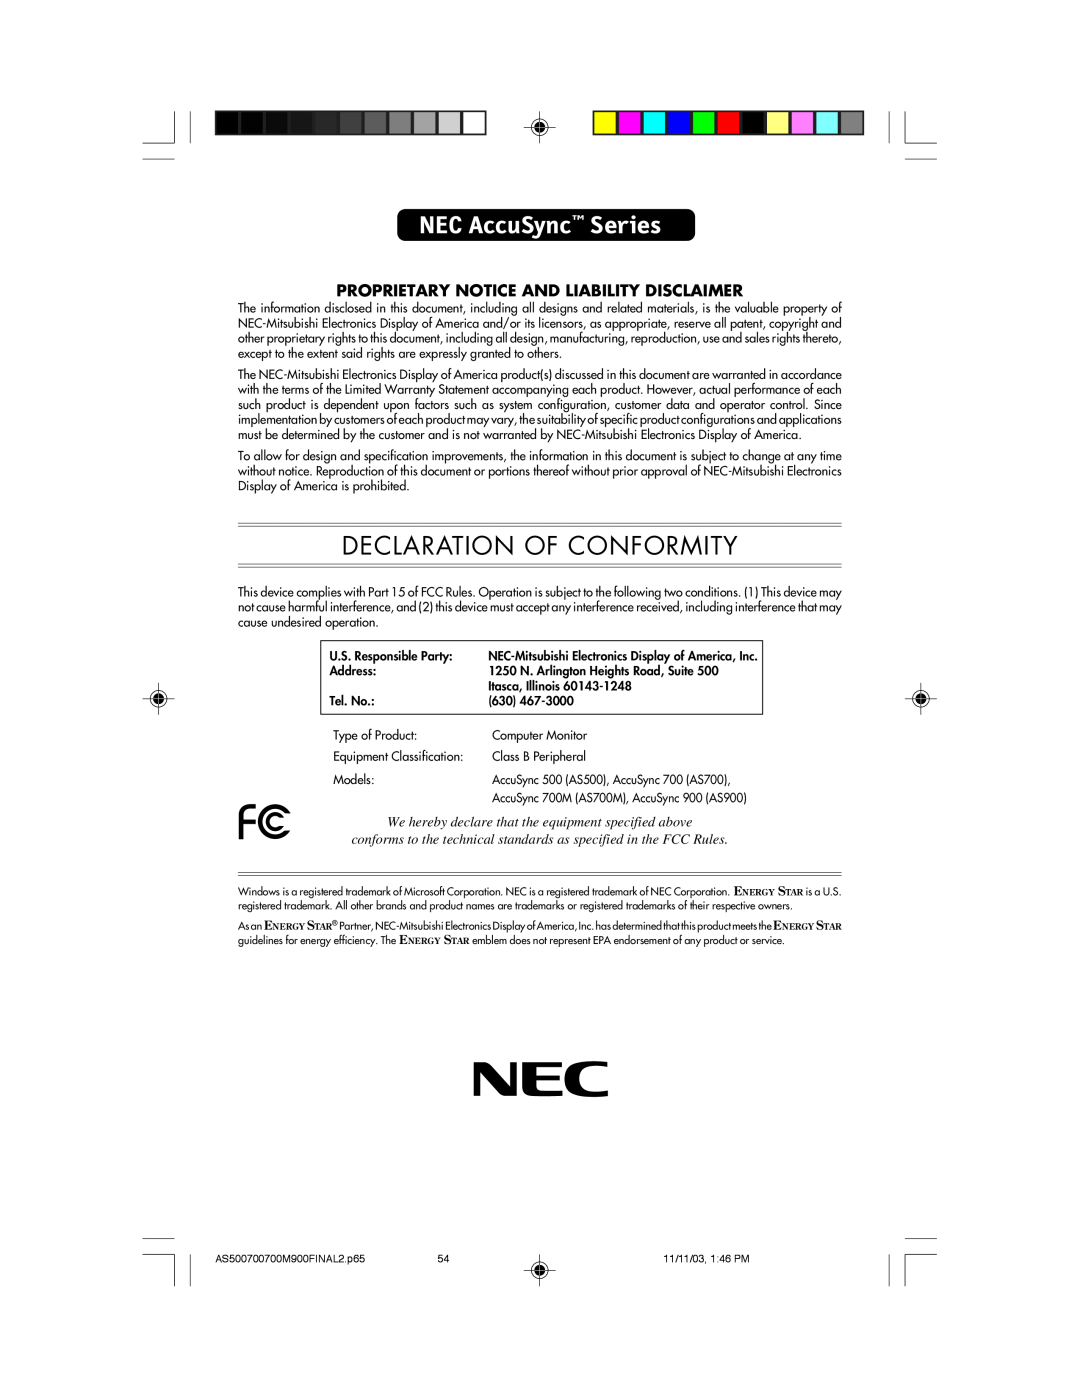 NEC 500, 700, 700M, 900 manual NEC AccuSync Series, Declaration Of Conformity, Proprietary Notice And Liability Disclaimer 